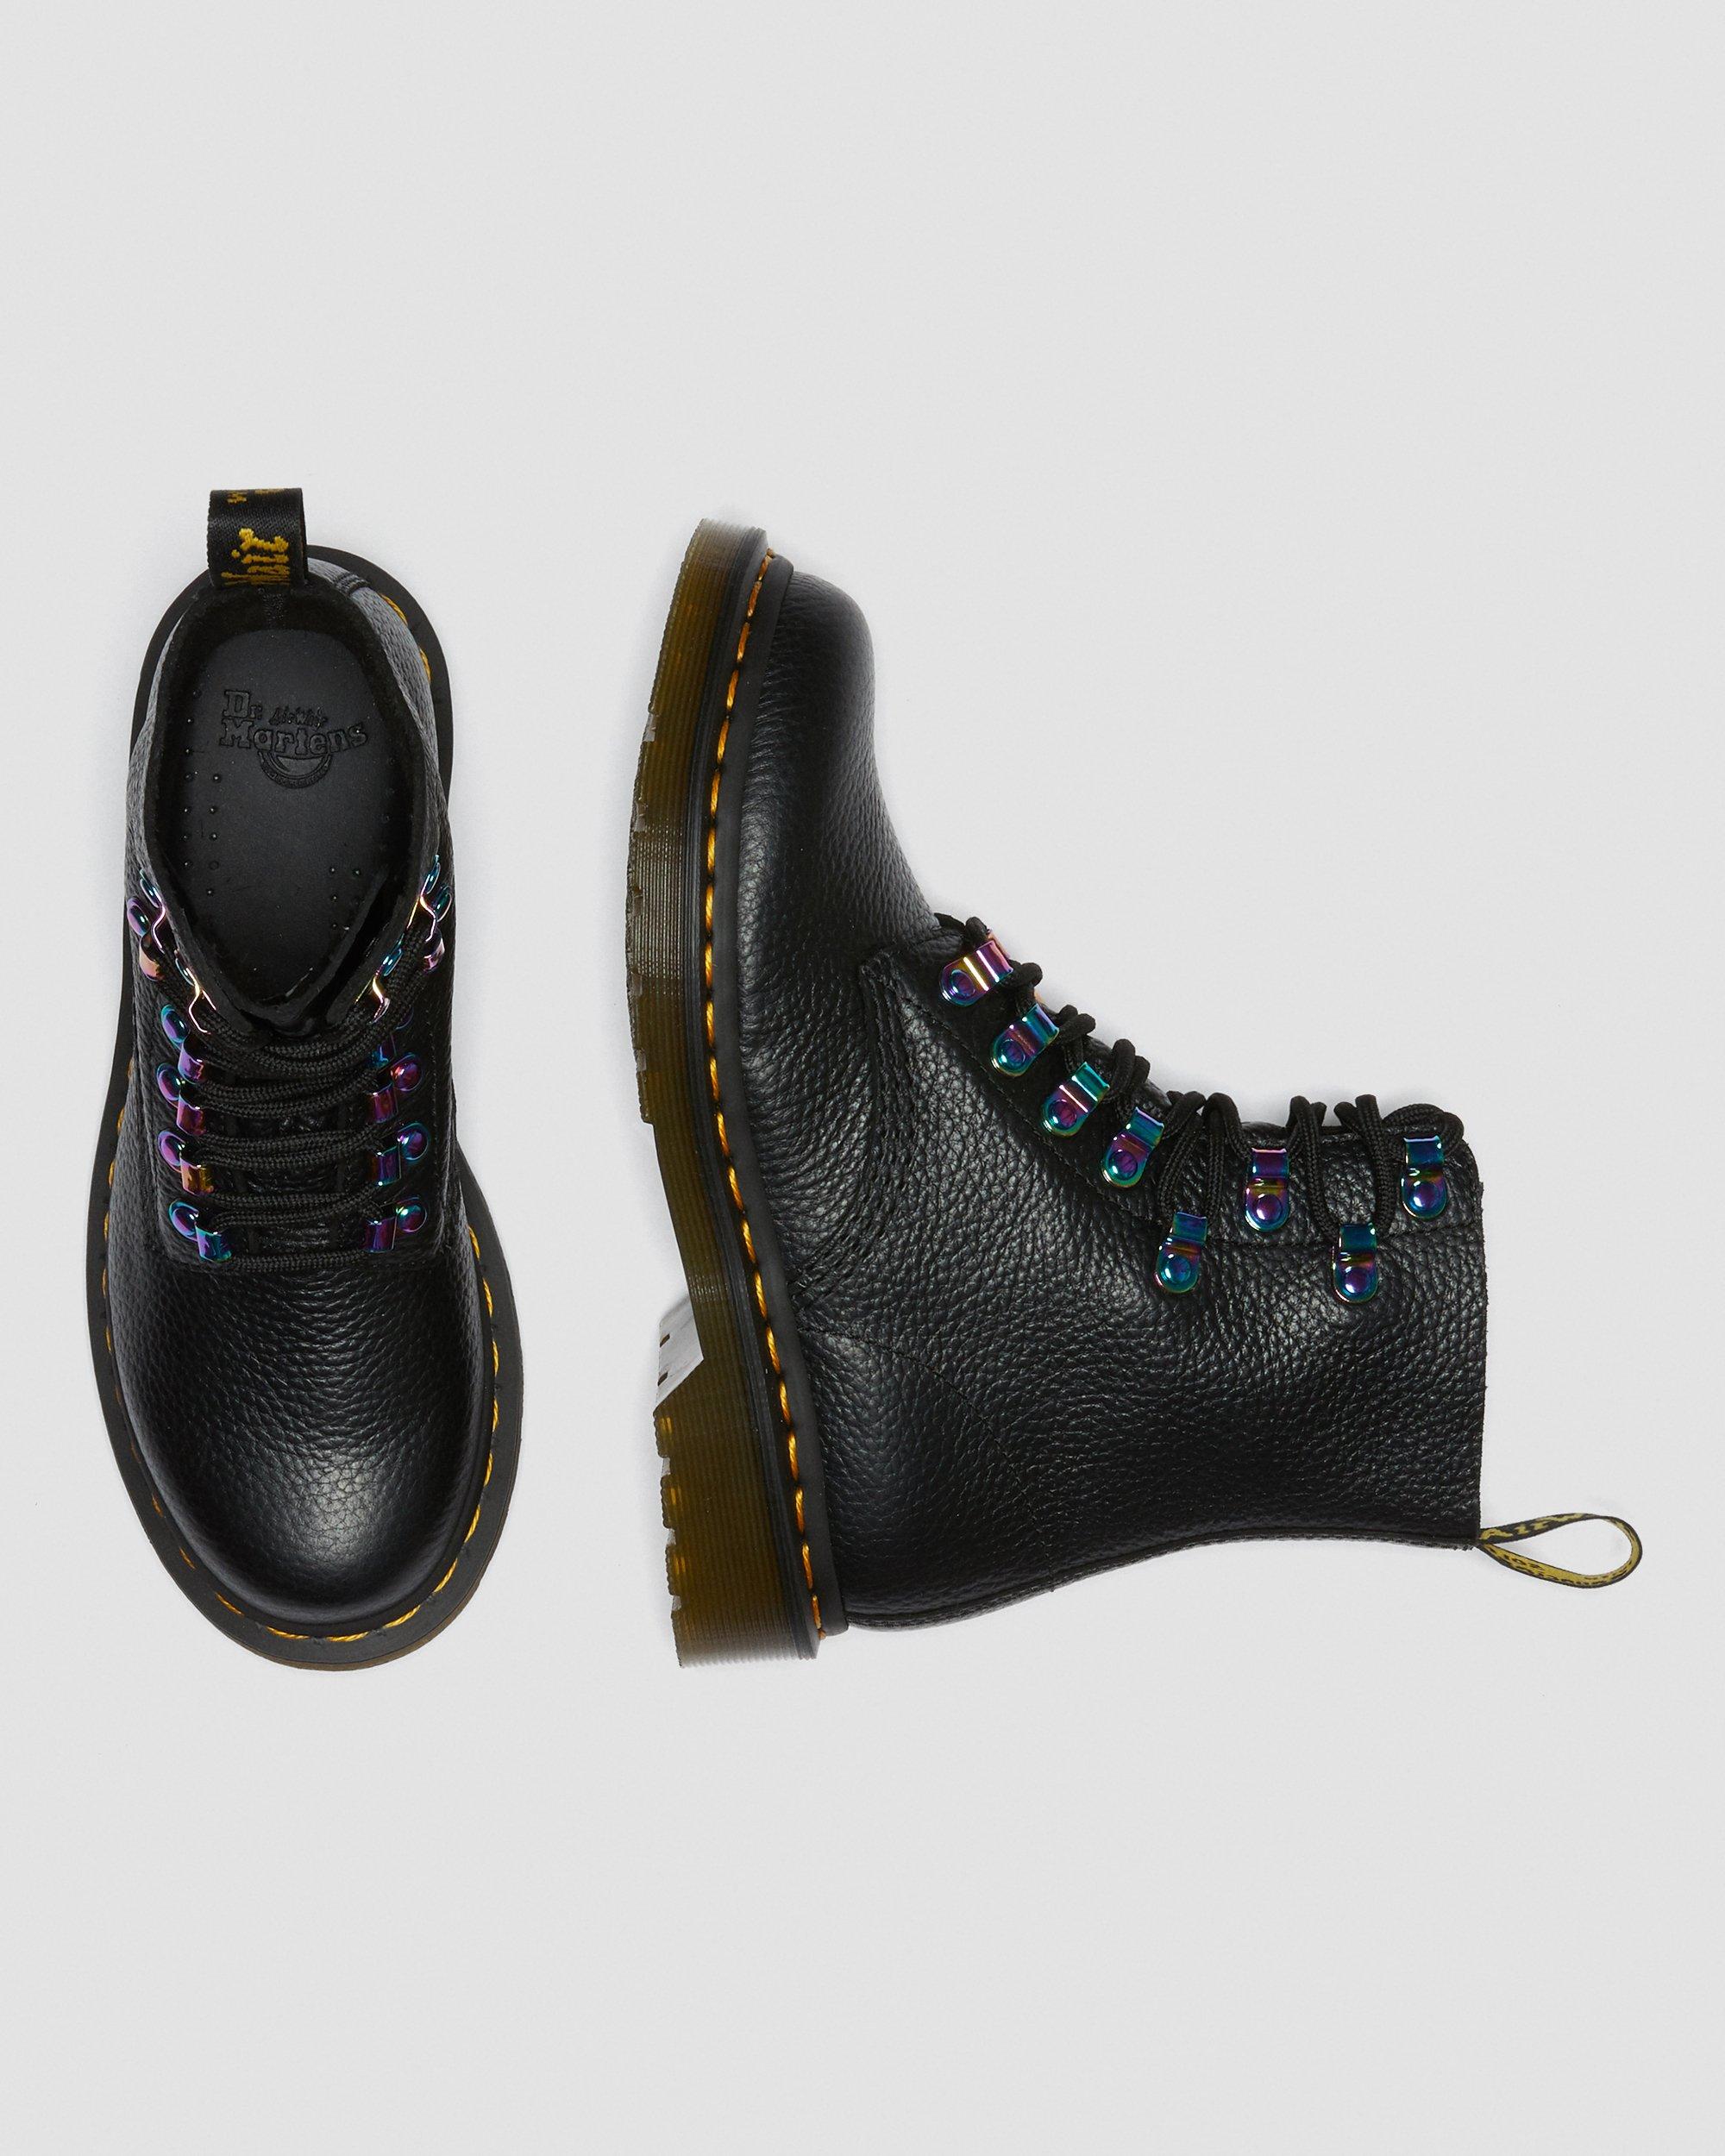 DR MARTENS 1460 Pascal Iridescent Hardware Lace Up Boots